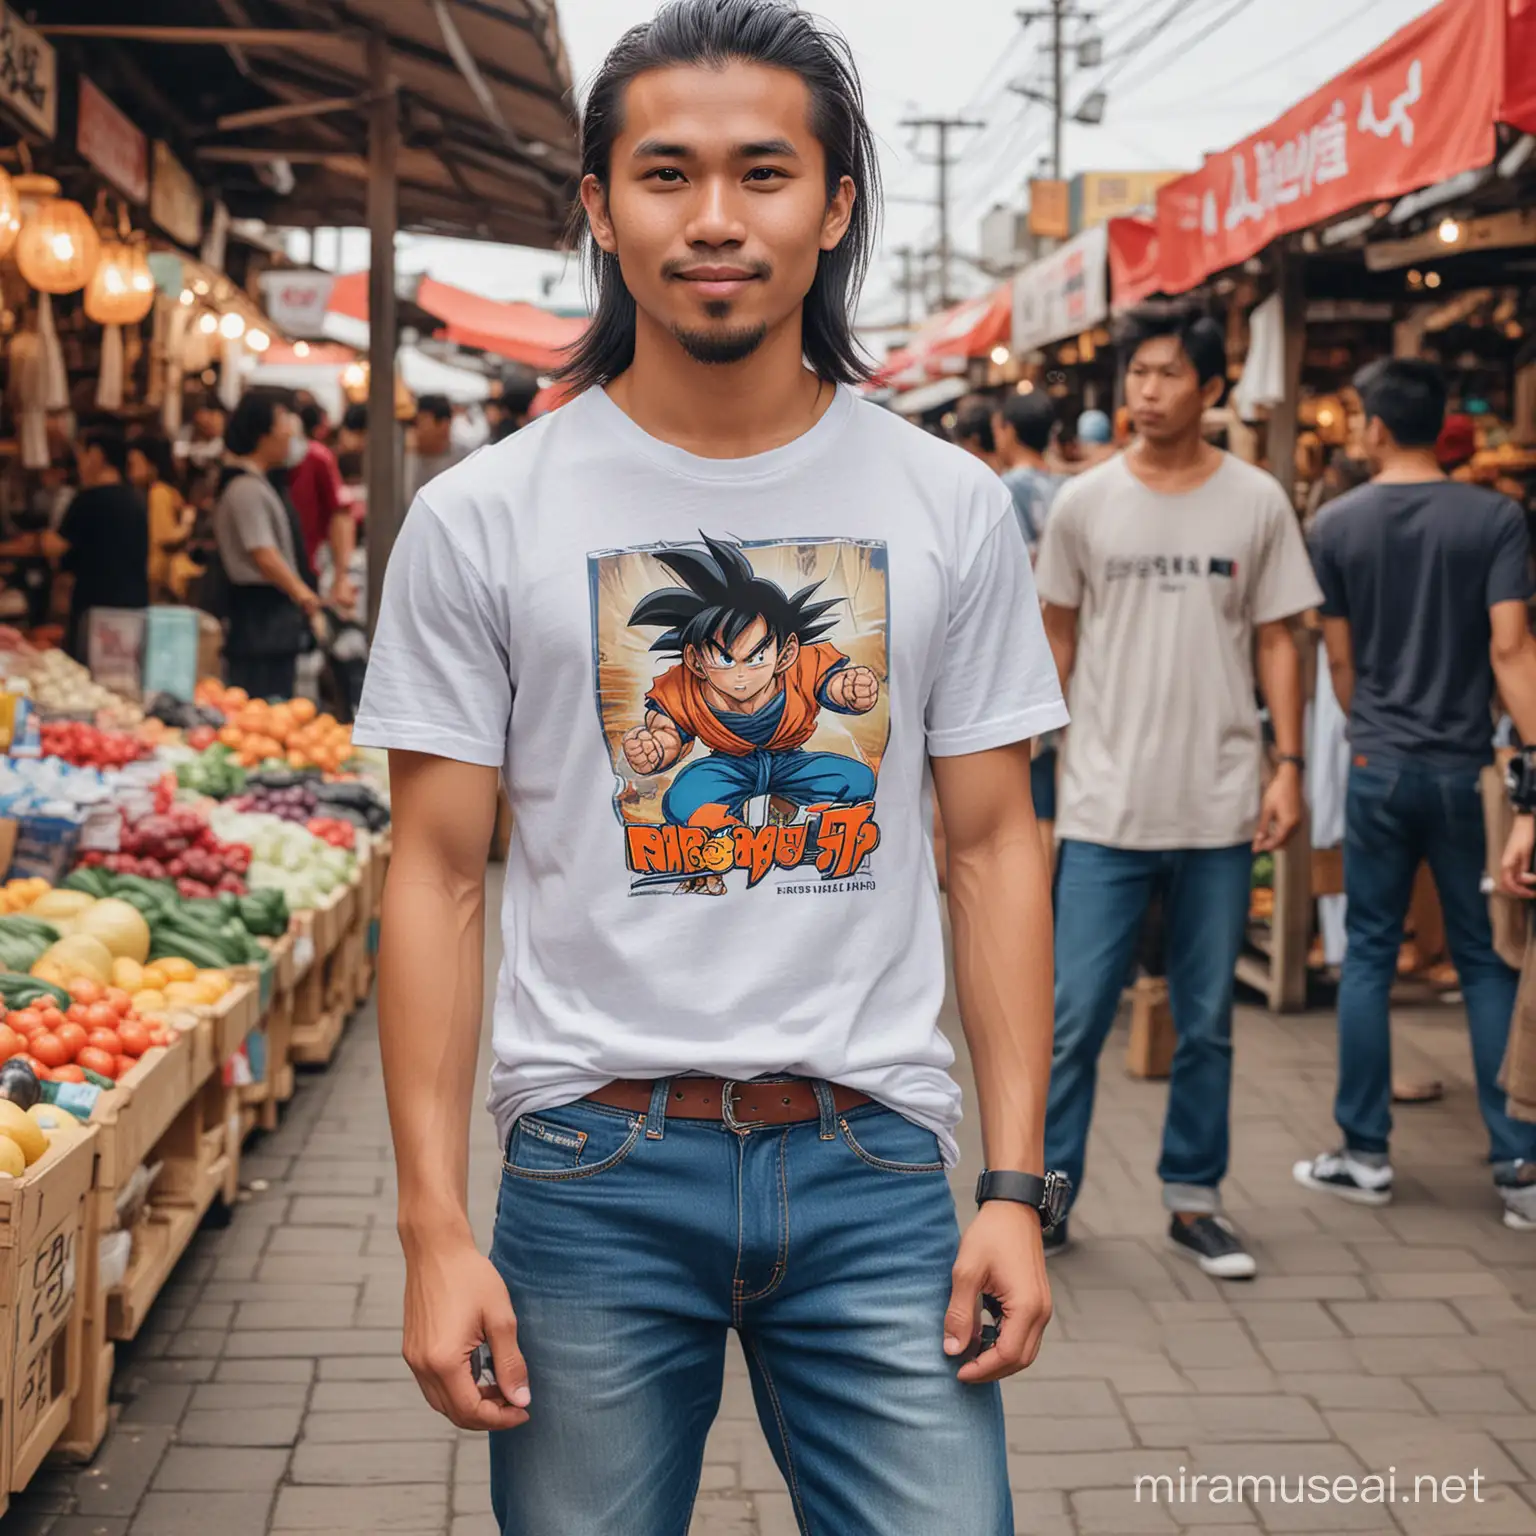 Friendly Indonesian Man in Anime Goku TShirt at Traditional Market